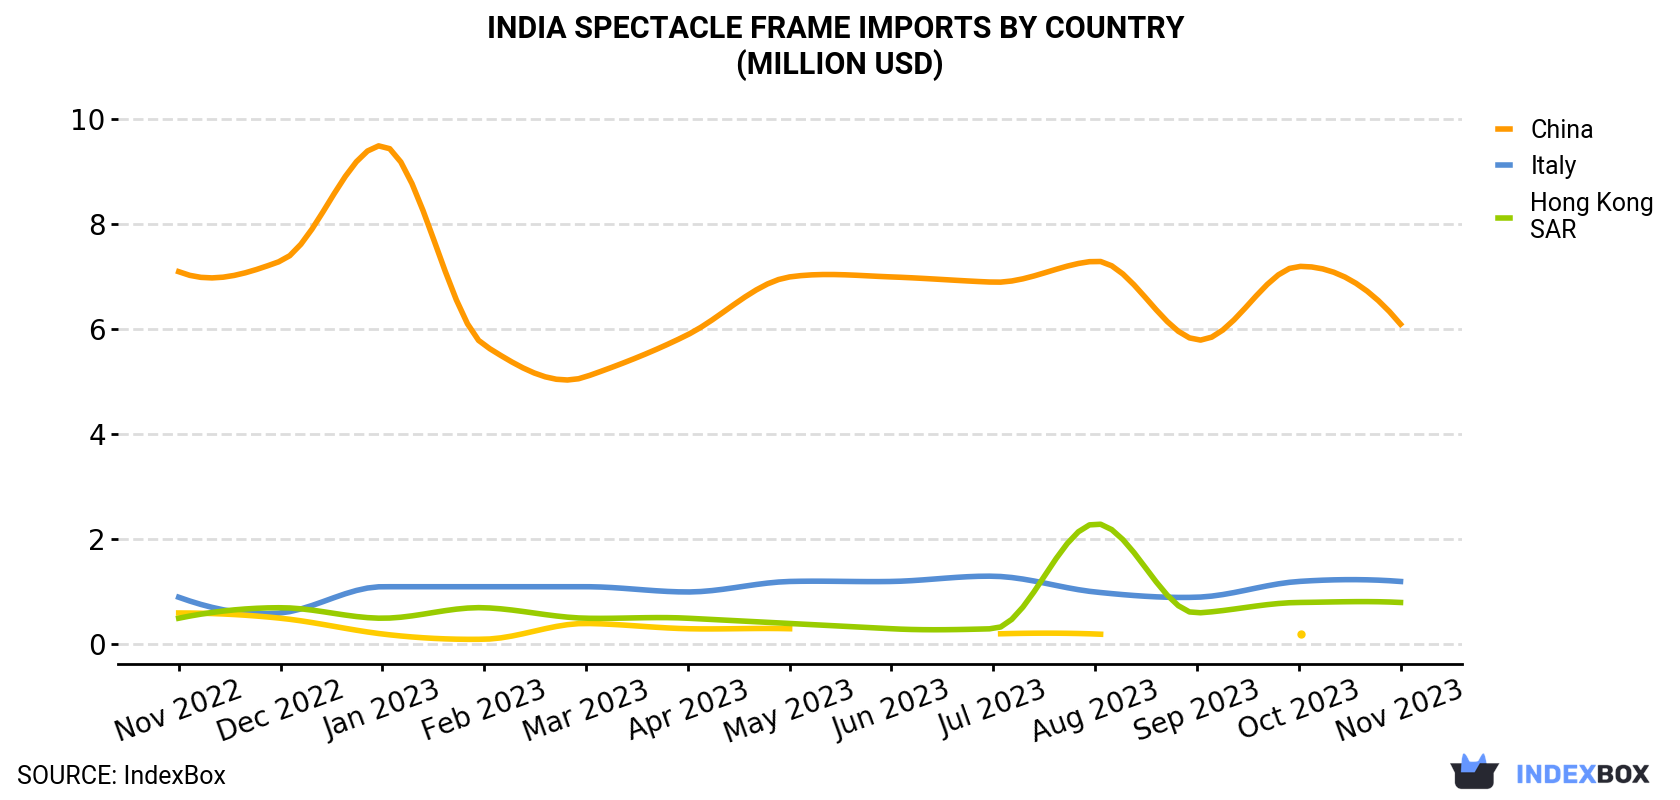 India Spectacle Frame Imports By Country (Million USD)